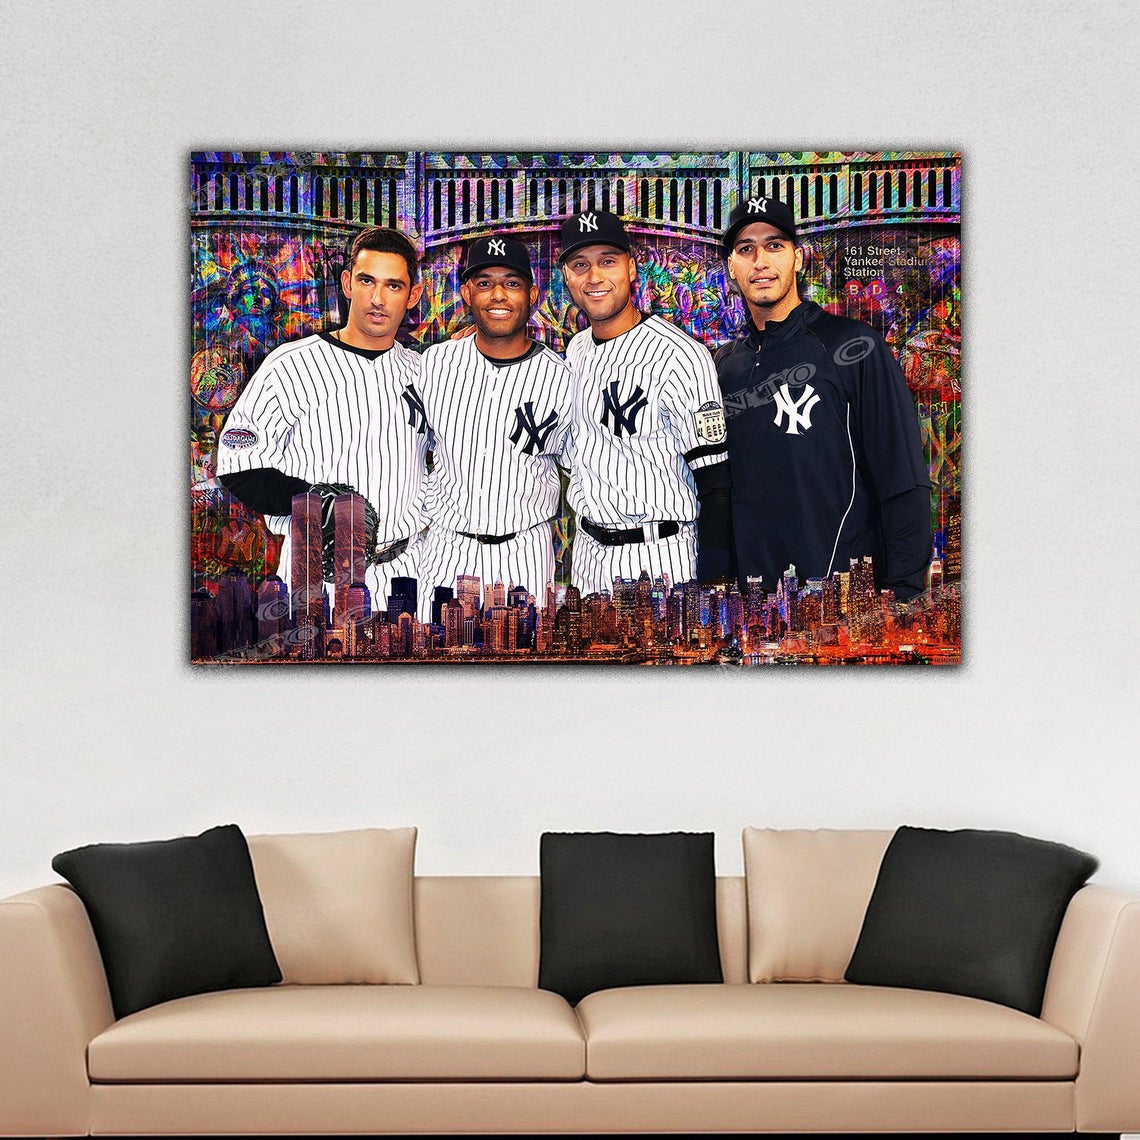  The Core 4 Of the N.Y. Yankees Wall Art 8x10 Photo